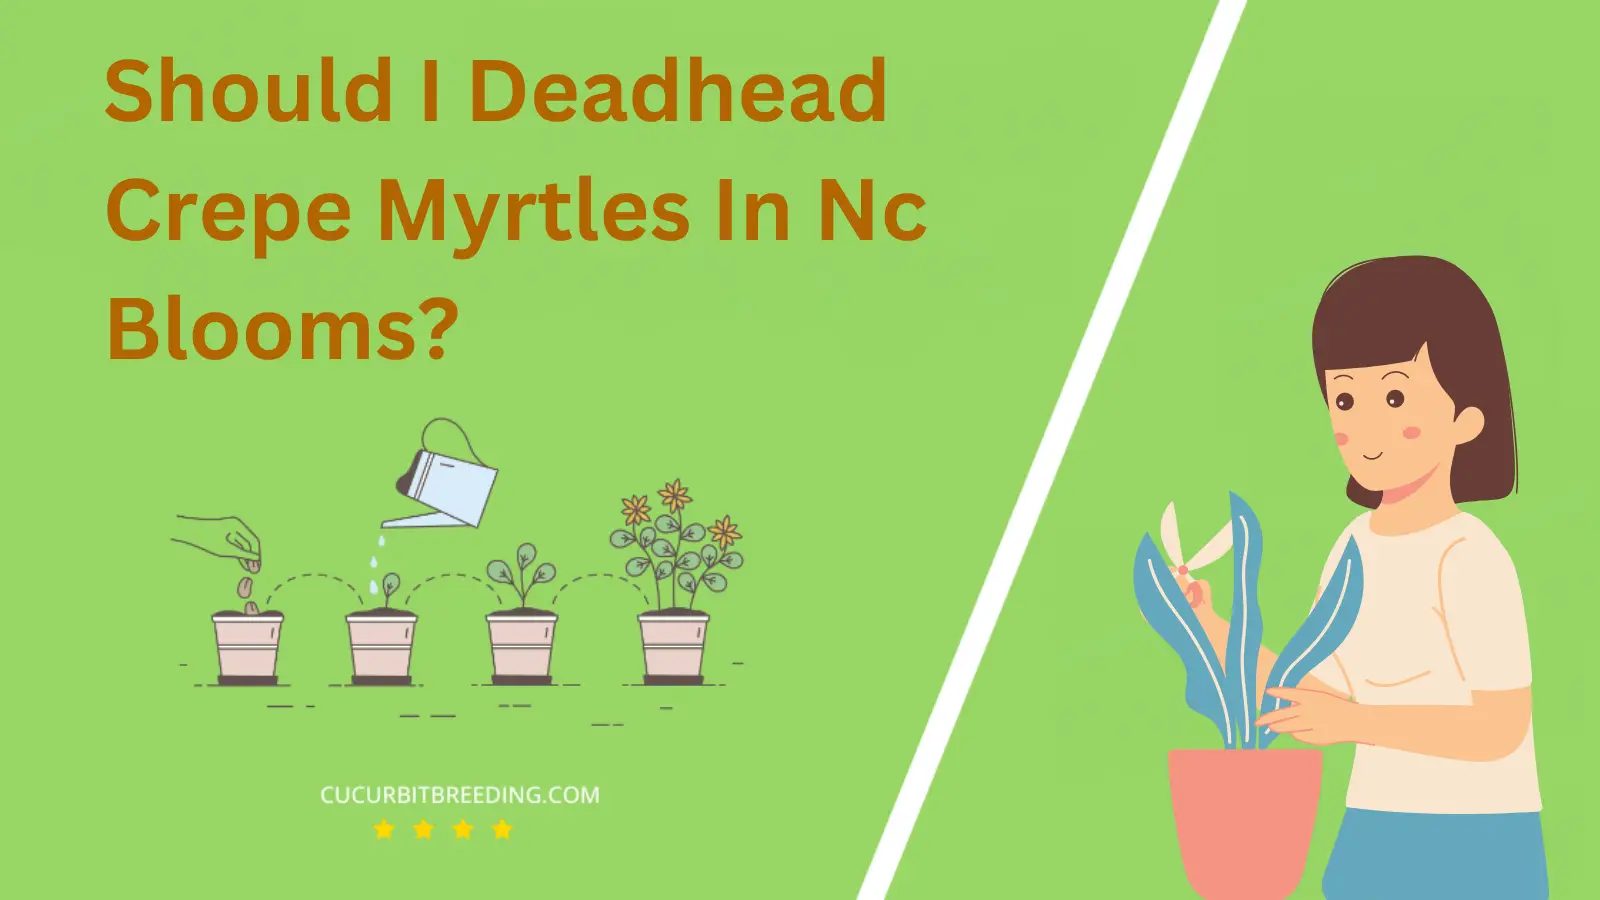 Should I Deadhead Crepe Myrtles In Nc Blooms?